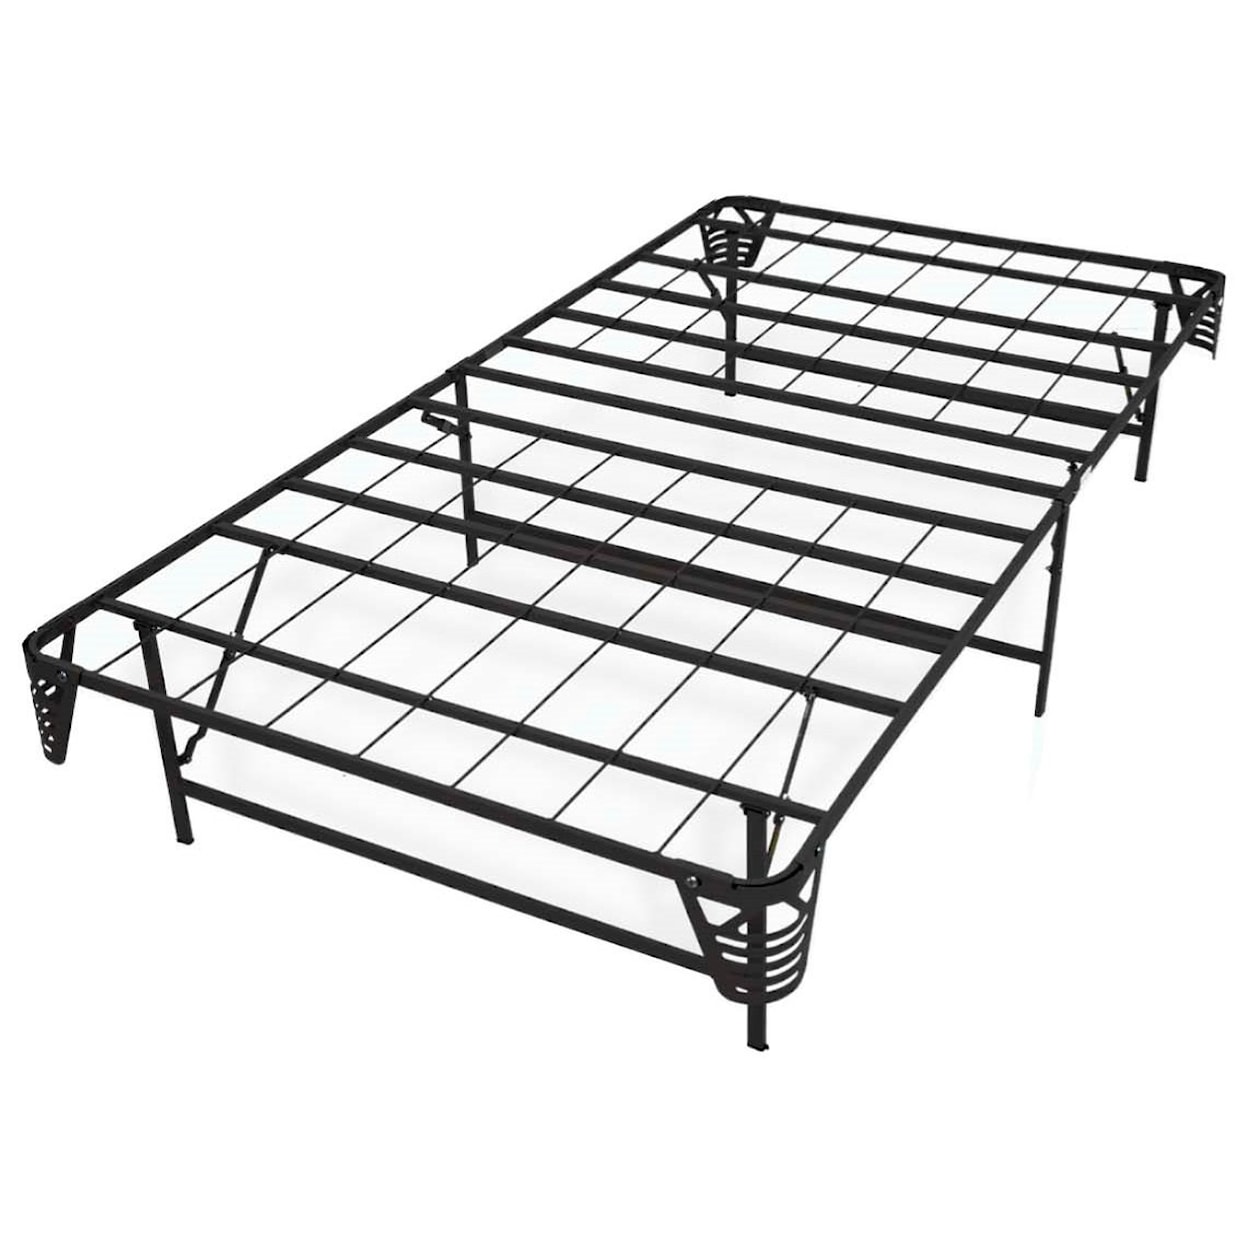 Glideaway Space Saver Bed Frame Full Space Saver Bed Frame